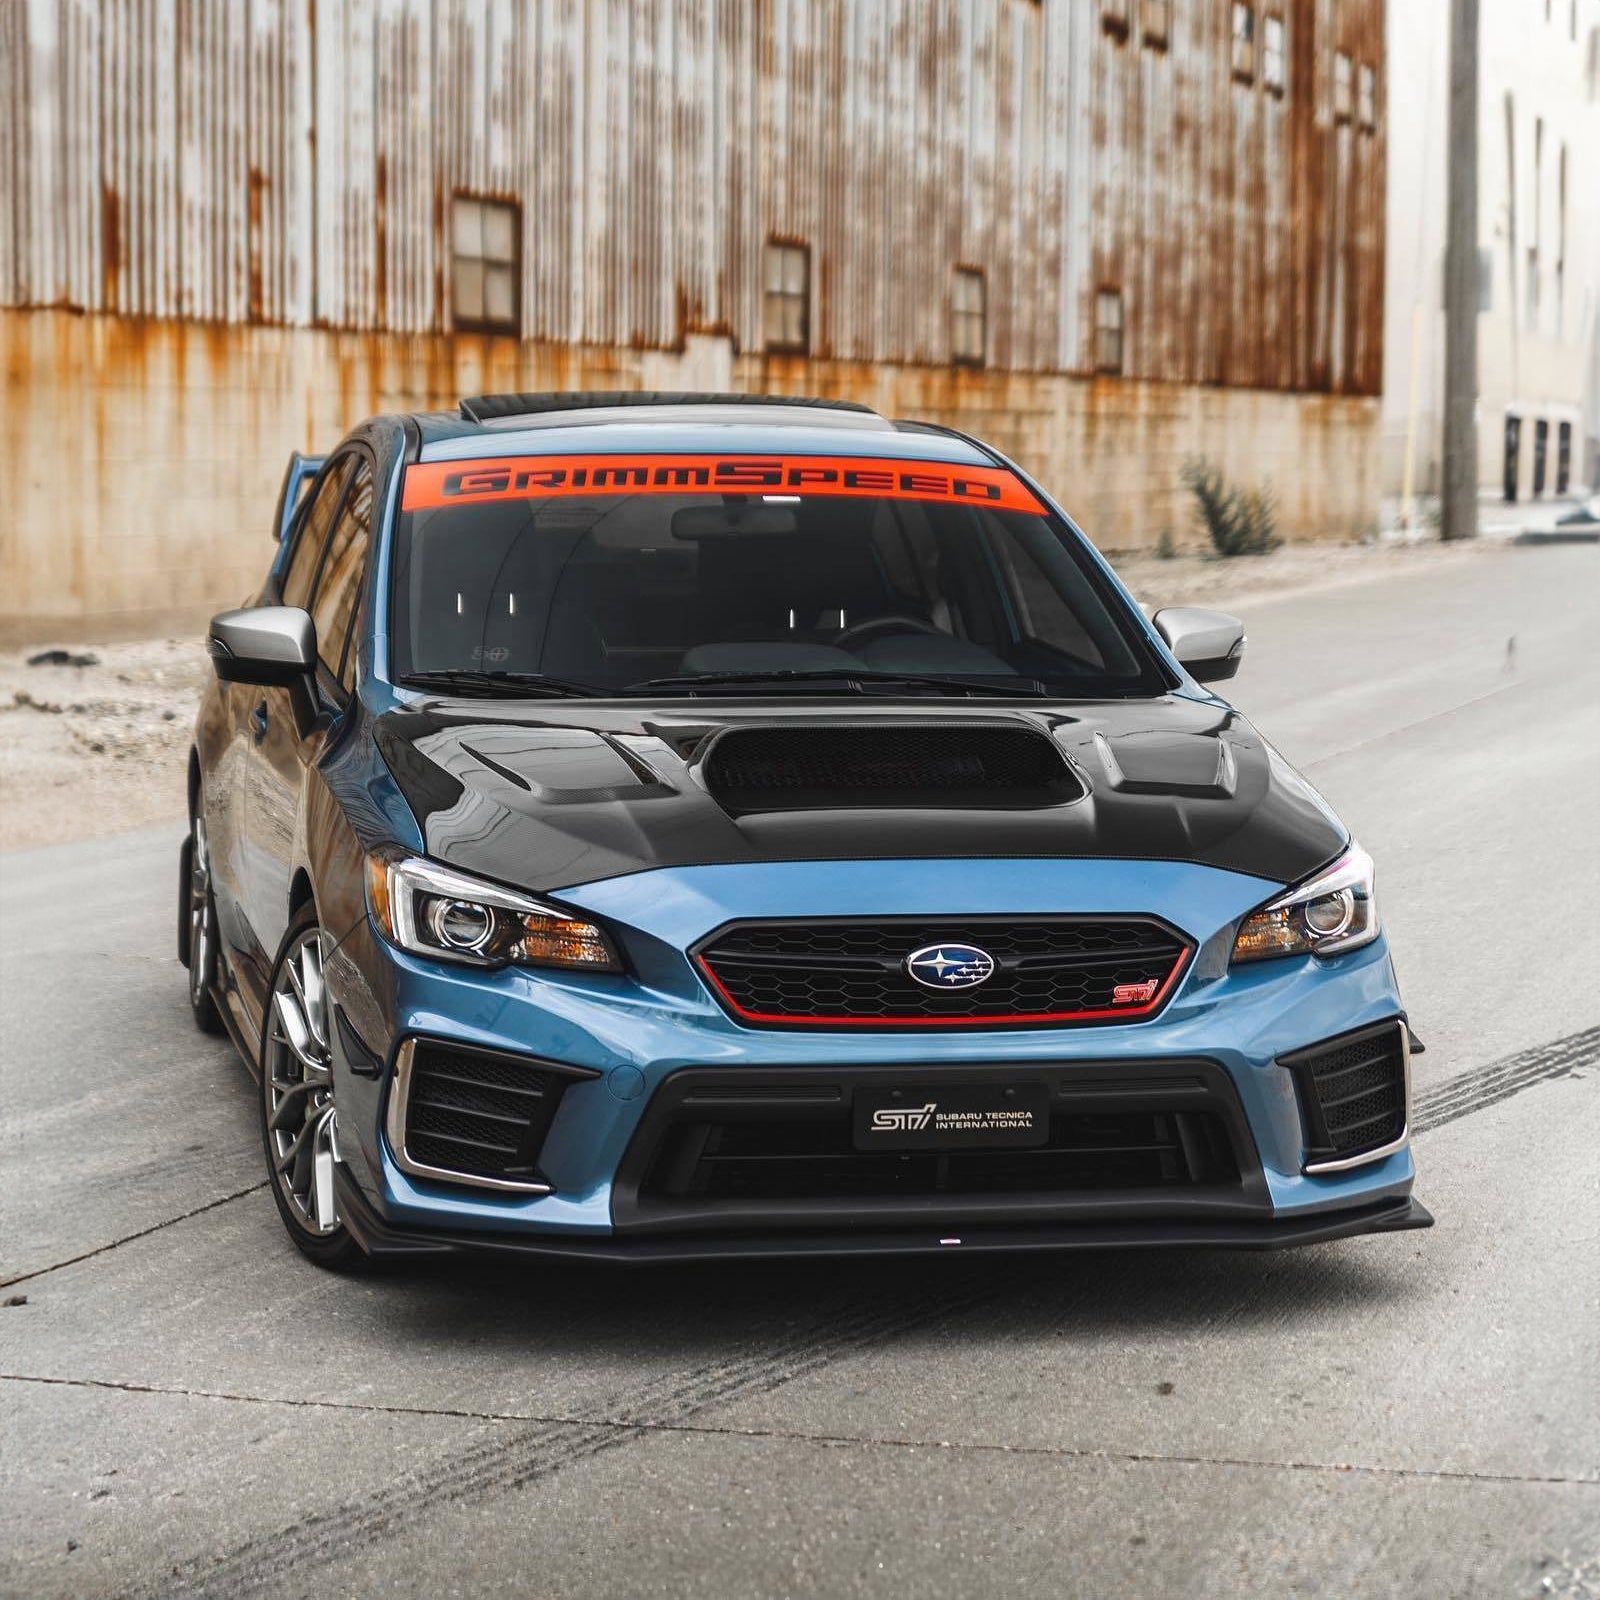 GrimmSpeed Windshield Banners - FREE U.S. SHIPPING!